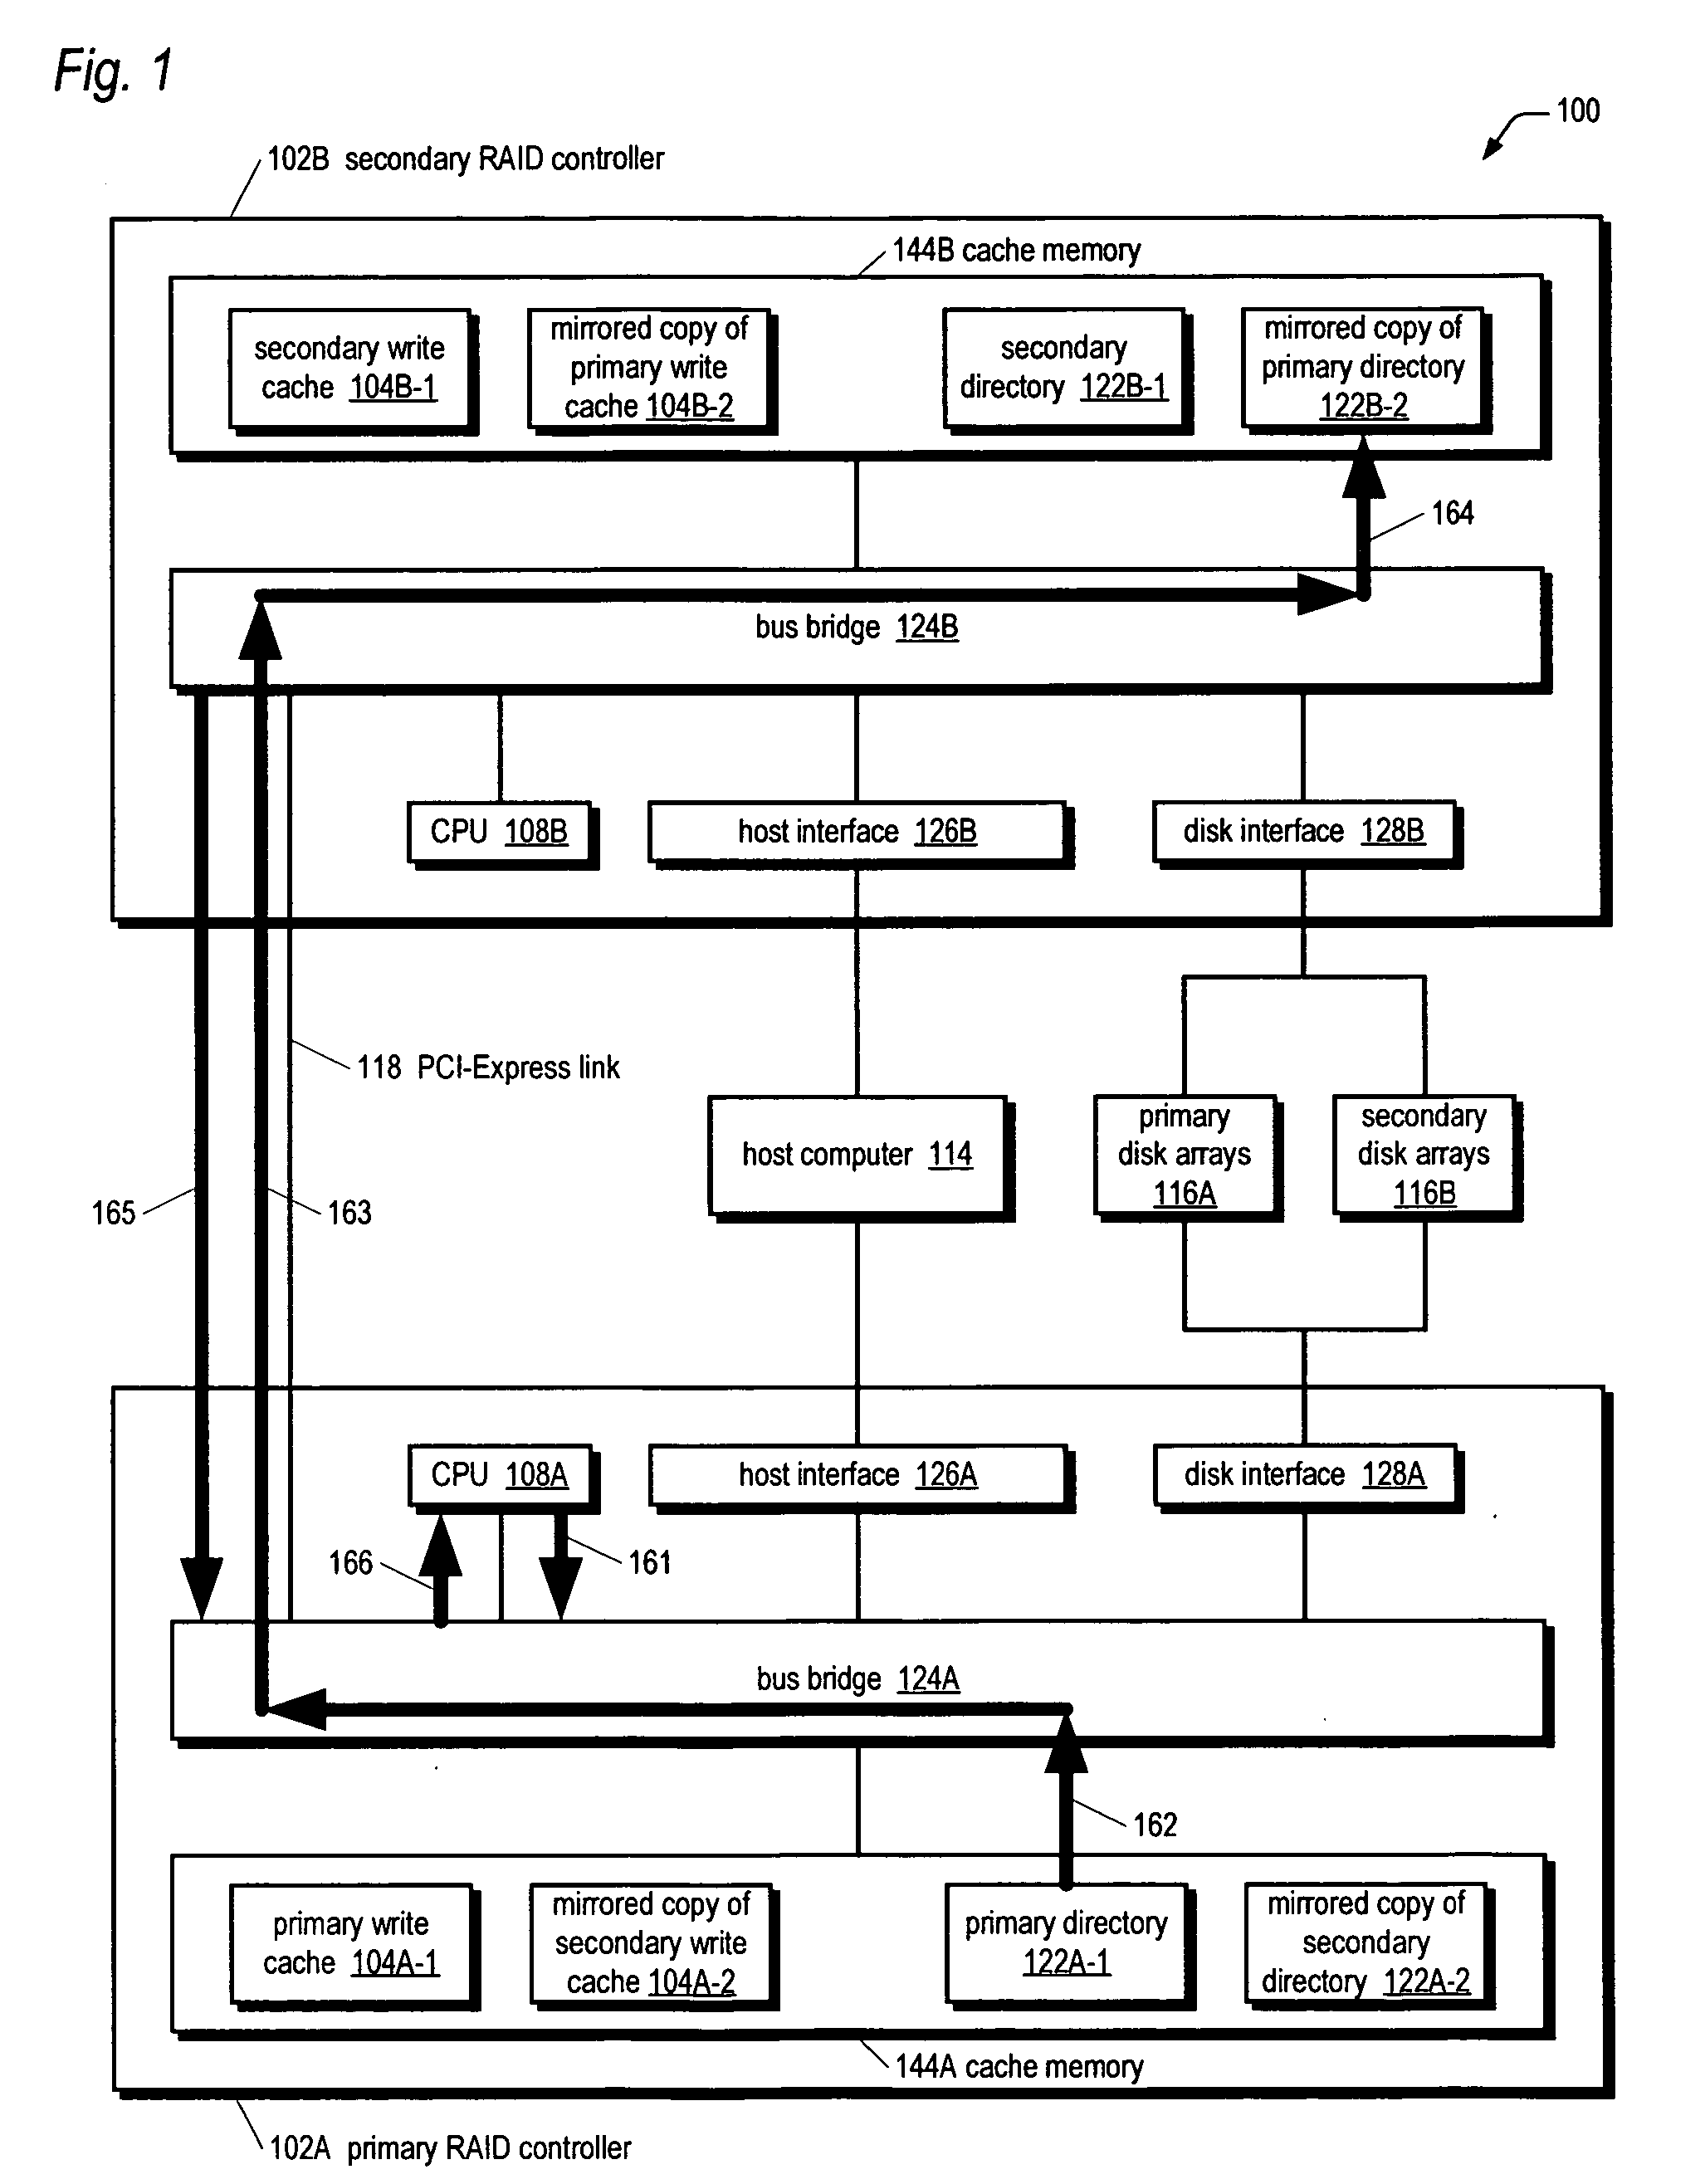 Certified memory-to-memory data transfer between active-active raid controllers